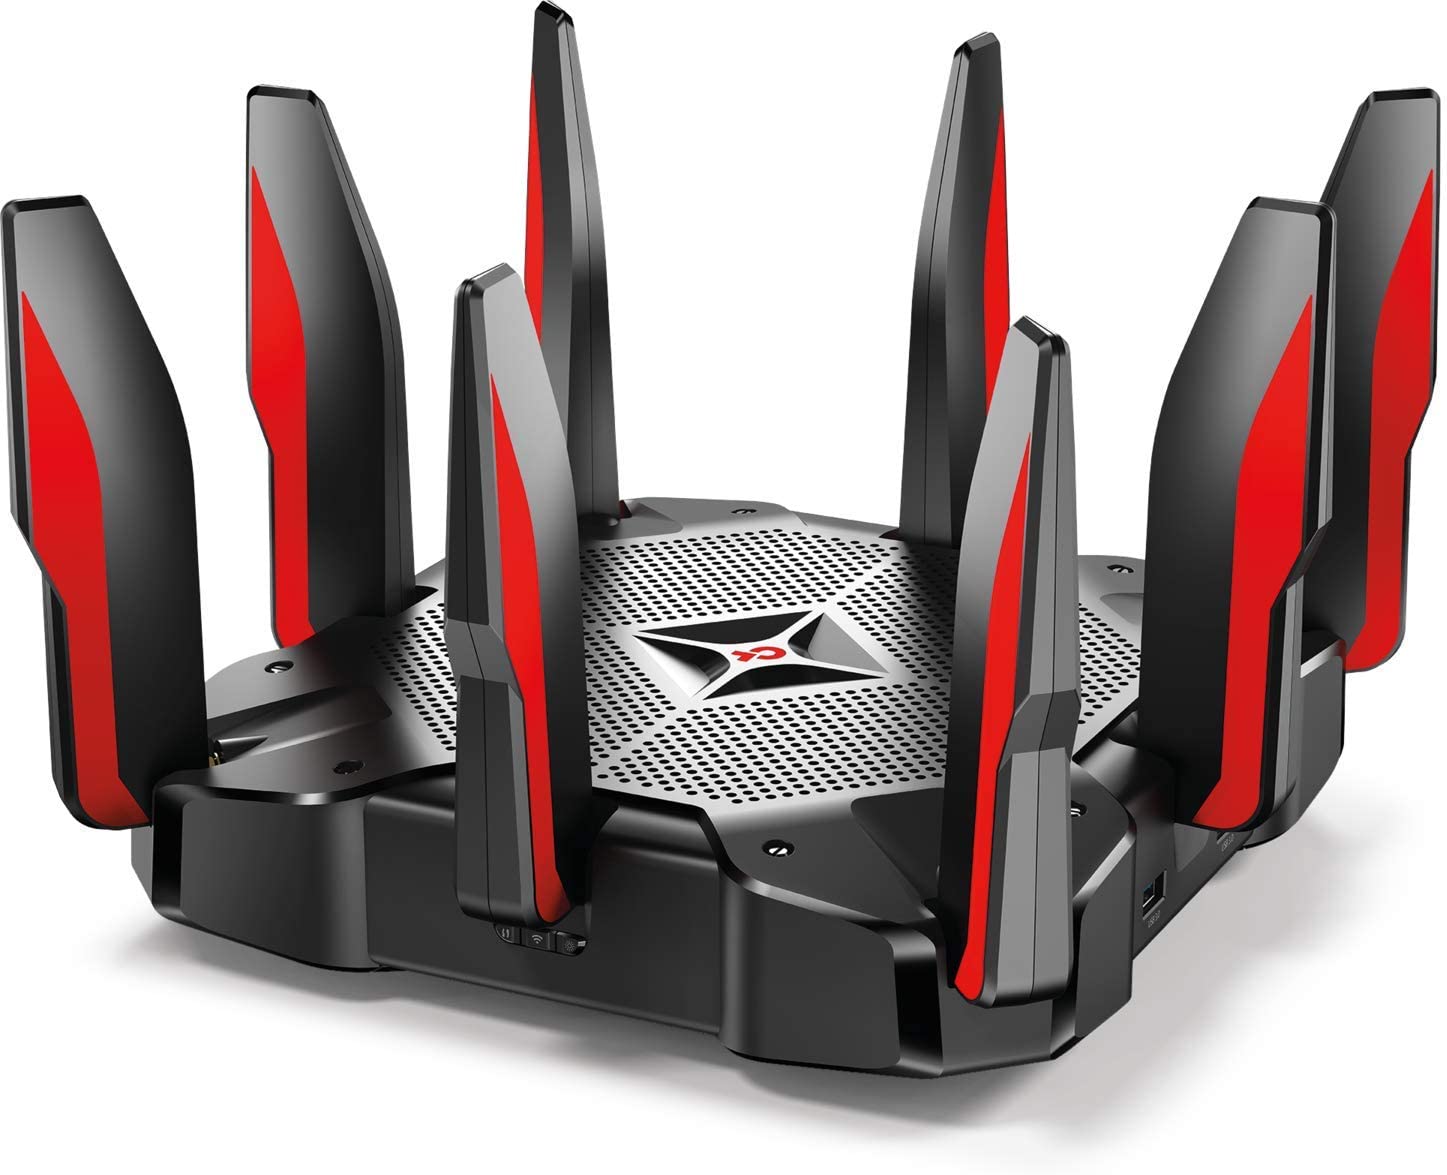 Tri-Band Wi-Fi Routers